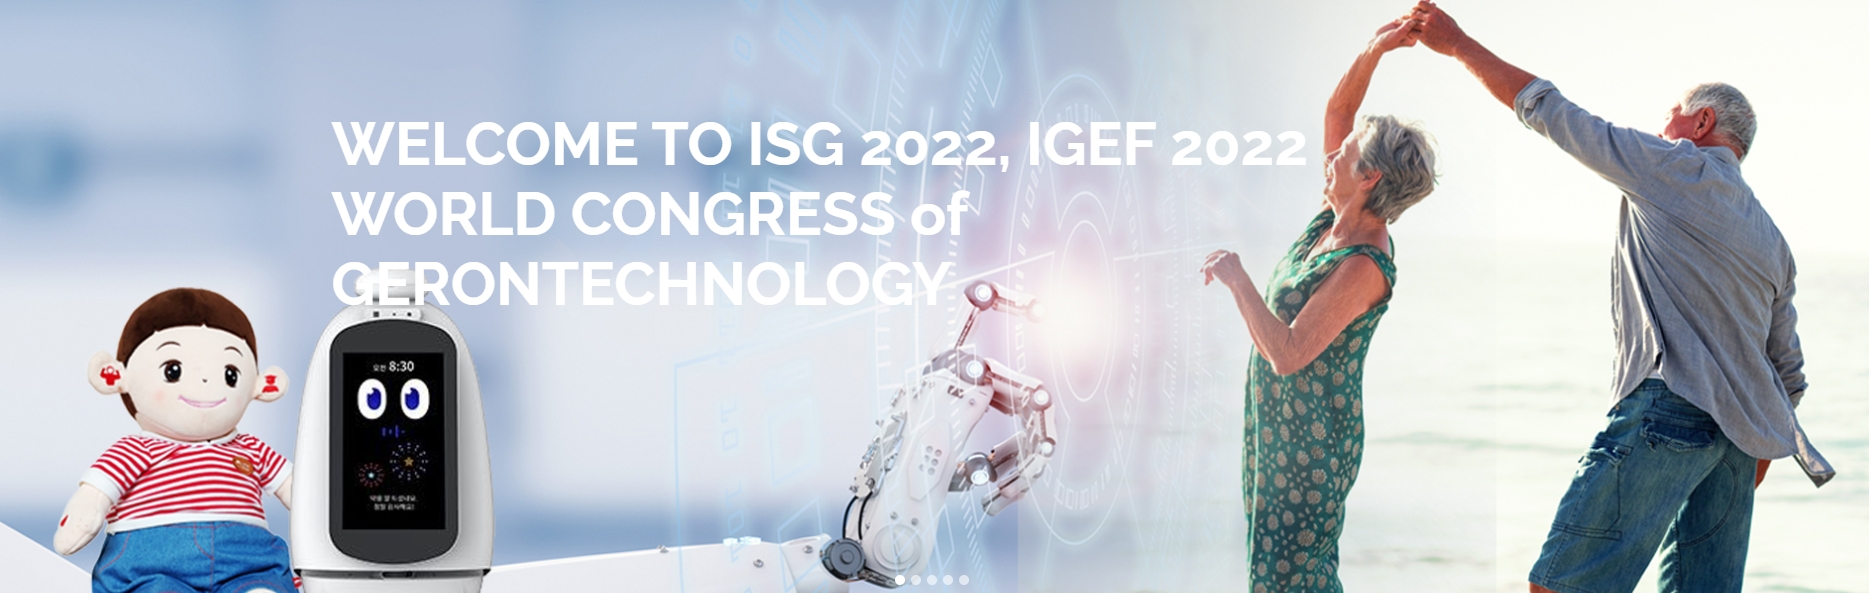 ISG 2022 Conference